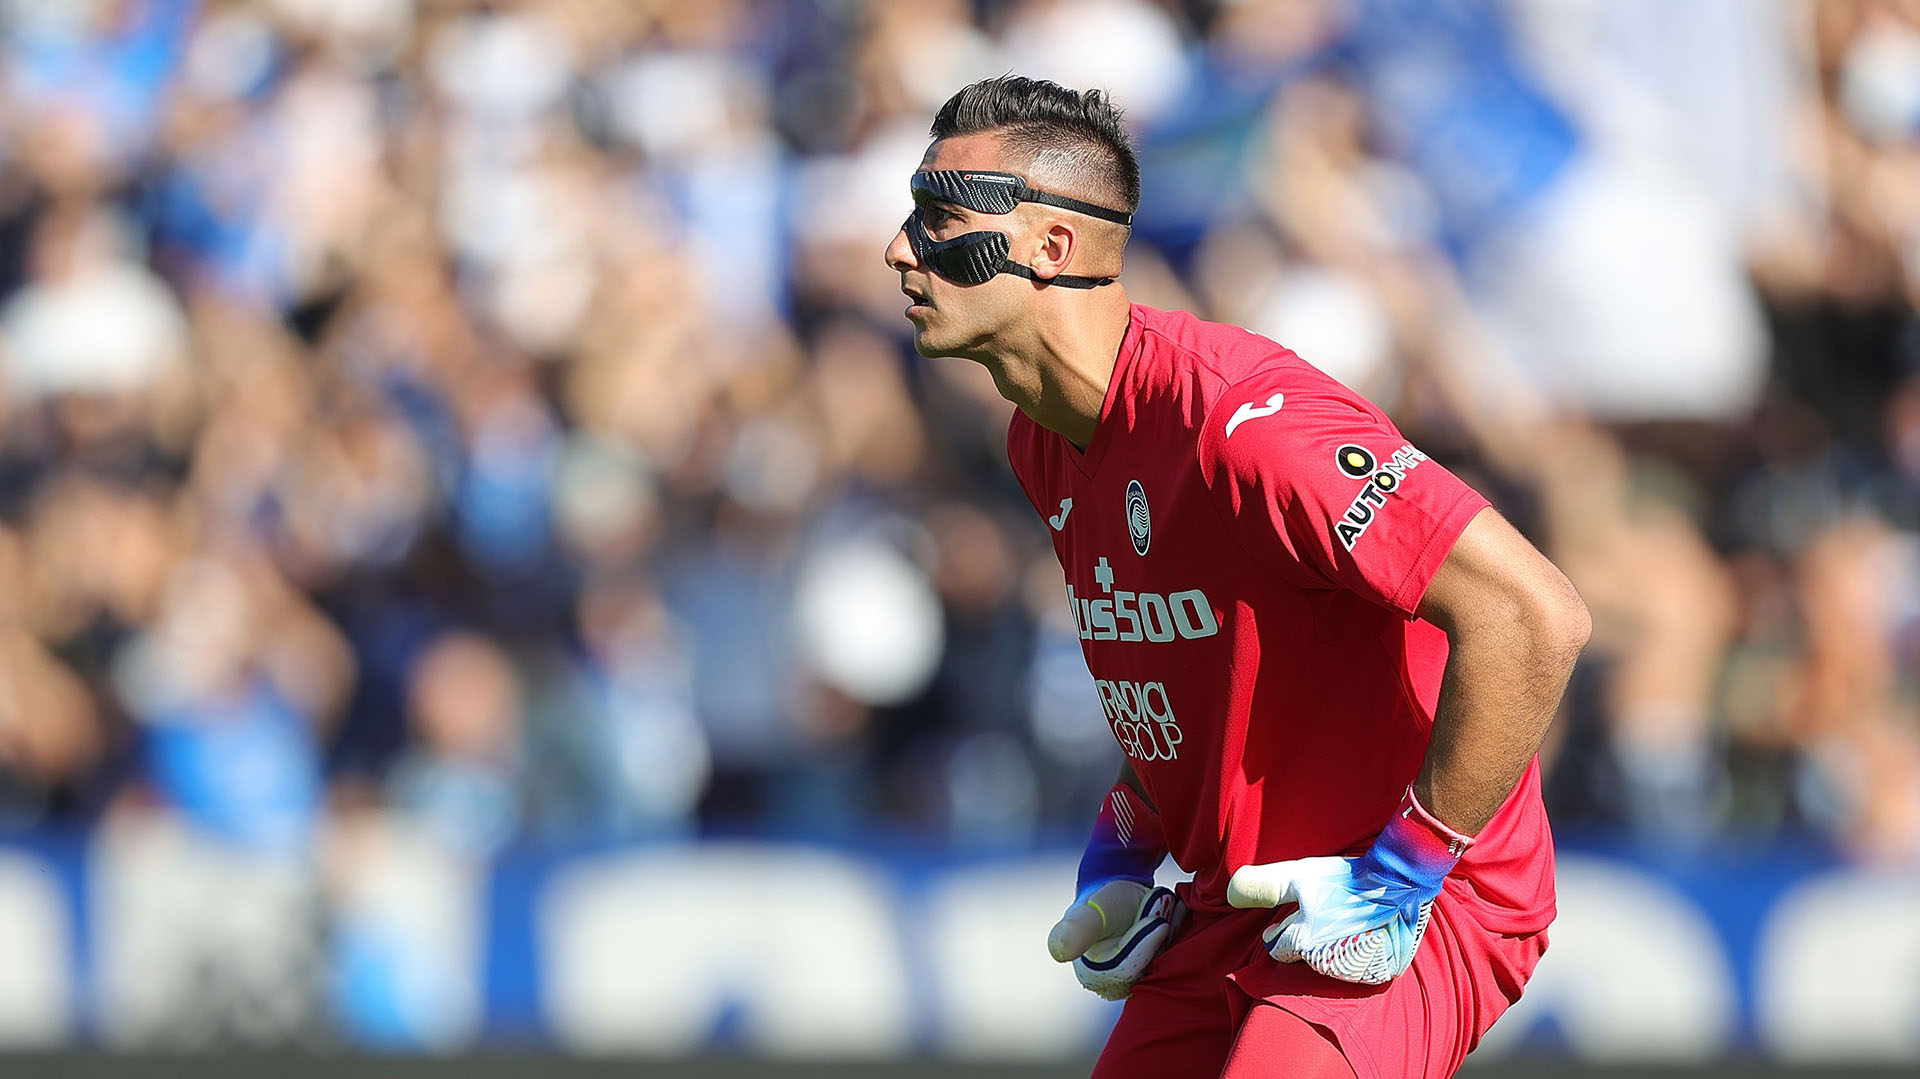 EMPOLI, ITALY - OCTOBER 30: Juan Agustín Musso goalkeeper of Atalanta BC looks on during the Serie A match between Empoli FC and Atalanta BC at Stadio Carlo Castellani on October 30, 2022 in Empoli, Italy.  (Photo by Gabriele Maltinti/Getty Images)